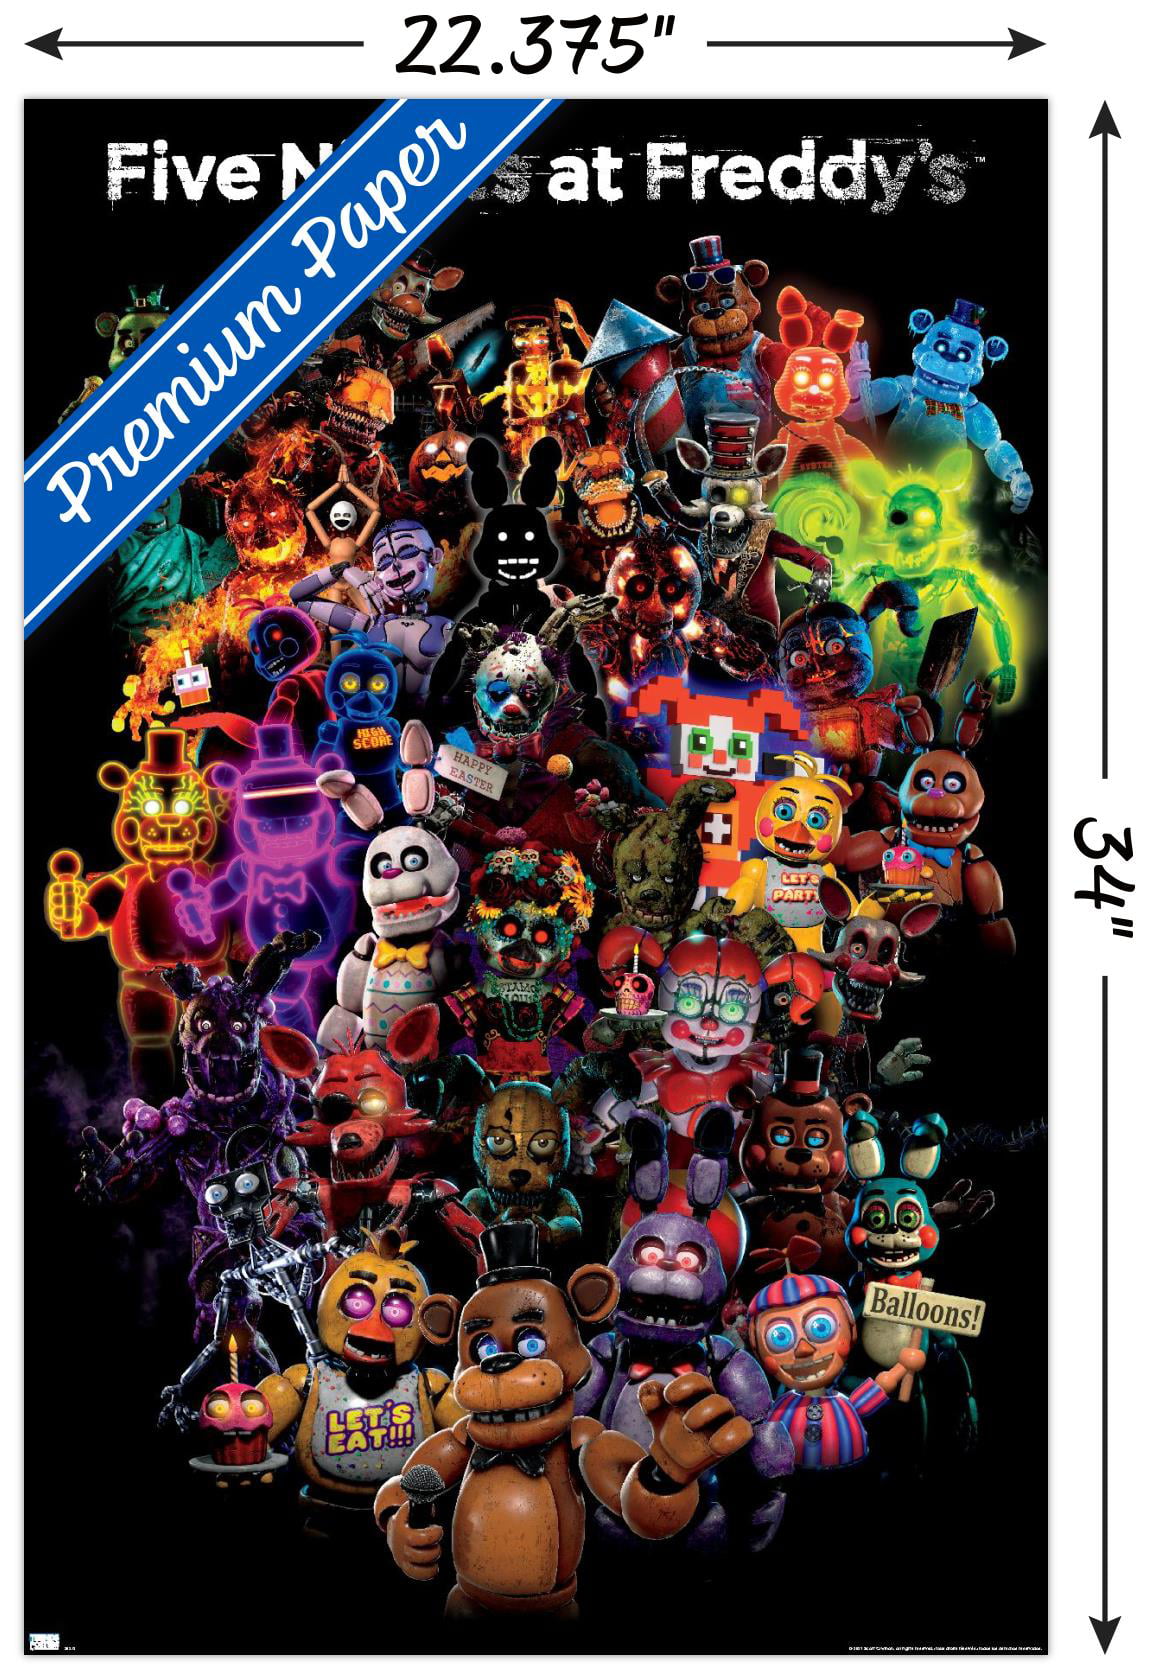 Trends International Five Nights at Freddy's - Celebrate Wall Poster,  14.725 x 22.375, Premium Unframed Version